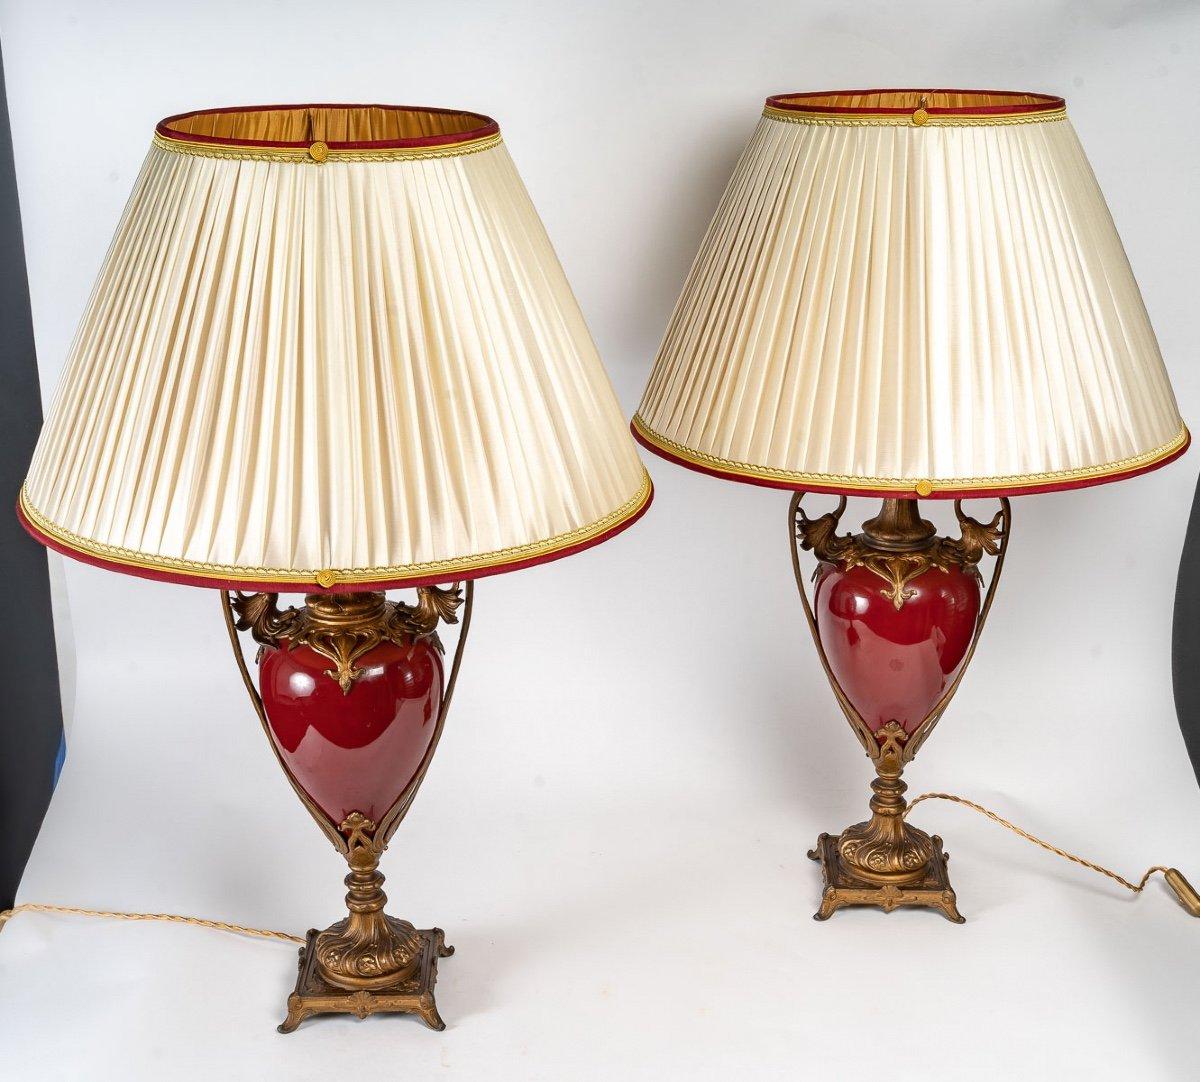 Pair of 19th century Porcelain and Gilt Bronze Lamps

Nice pair of lamps of Napoleon III period in porcelain and gilt bronze of the XIXth century.

Dimensions:

Lamp base: h: 61cm, w: 23cm, d: 19cm

 With lampshade: h: 85cm, d: 55cm.